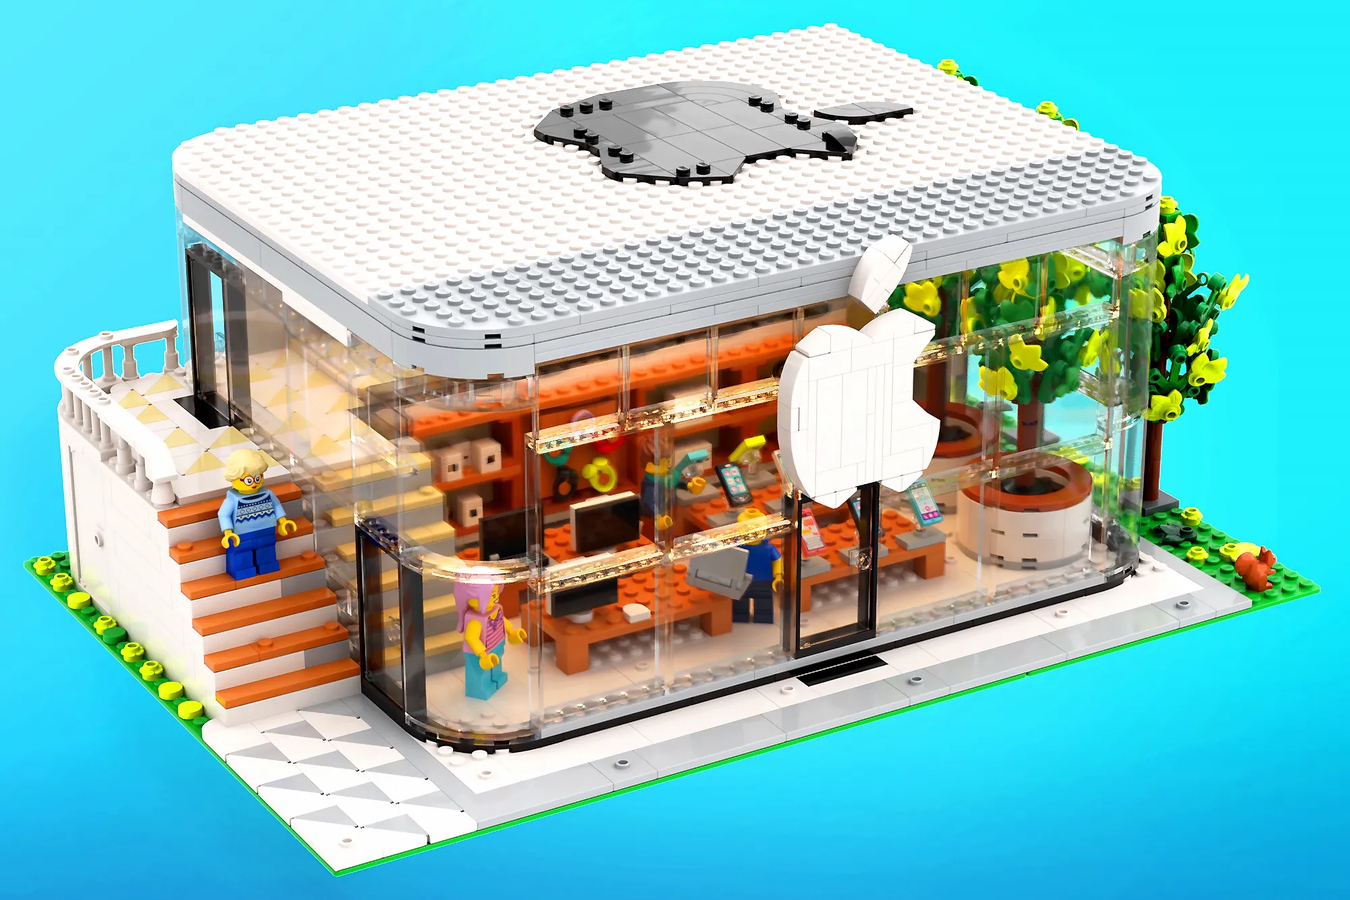 Apple fan created a mock-up of an Apple Store constructor, LEGO may release it to retailers